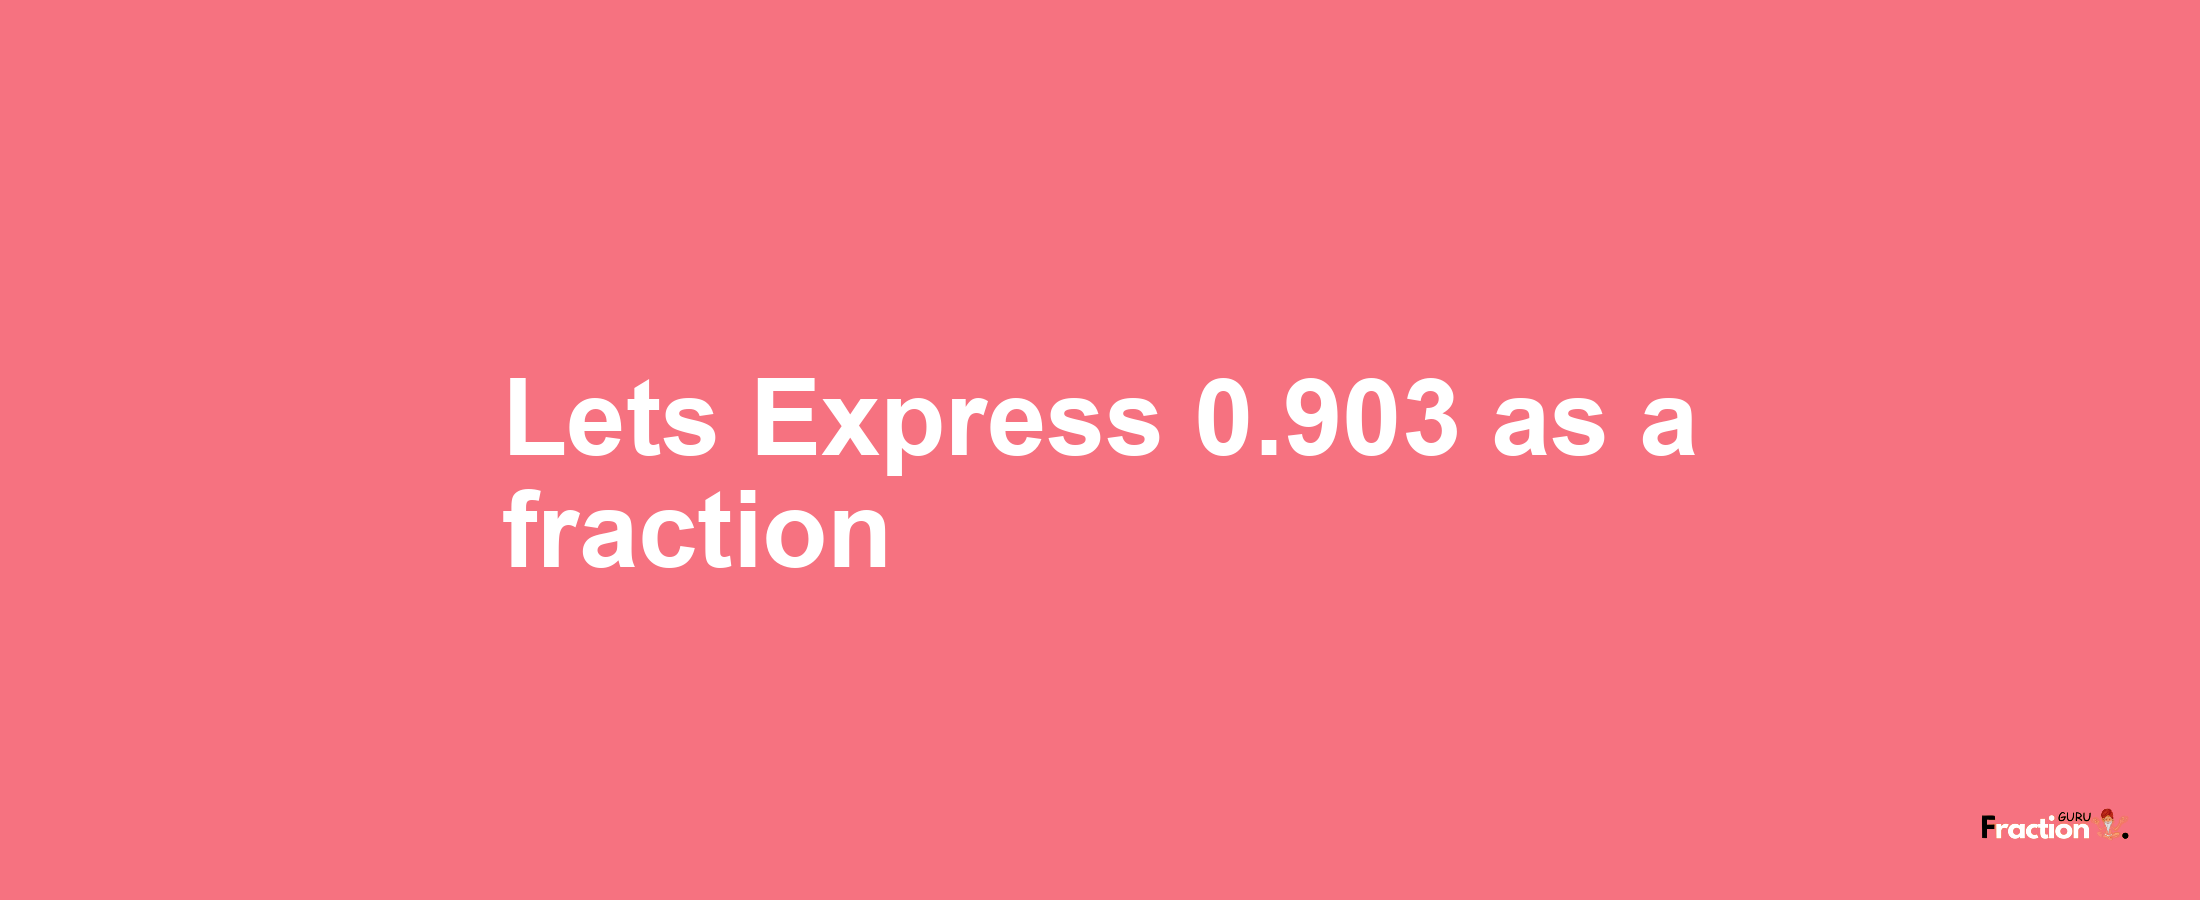 Lets Express 0.903 as afraction